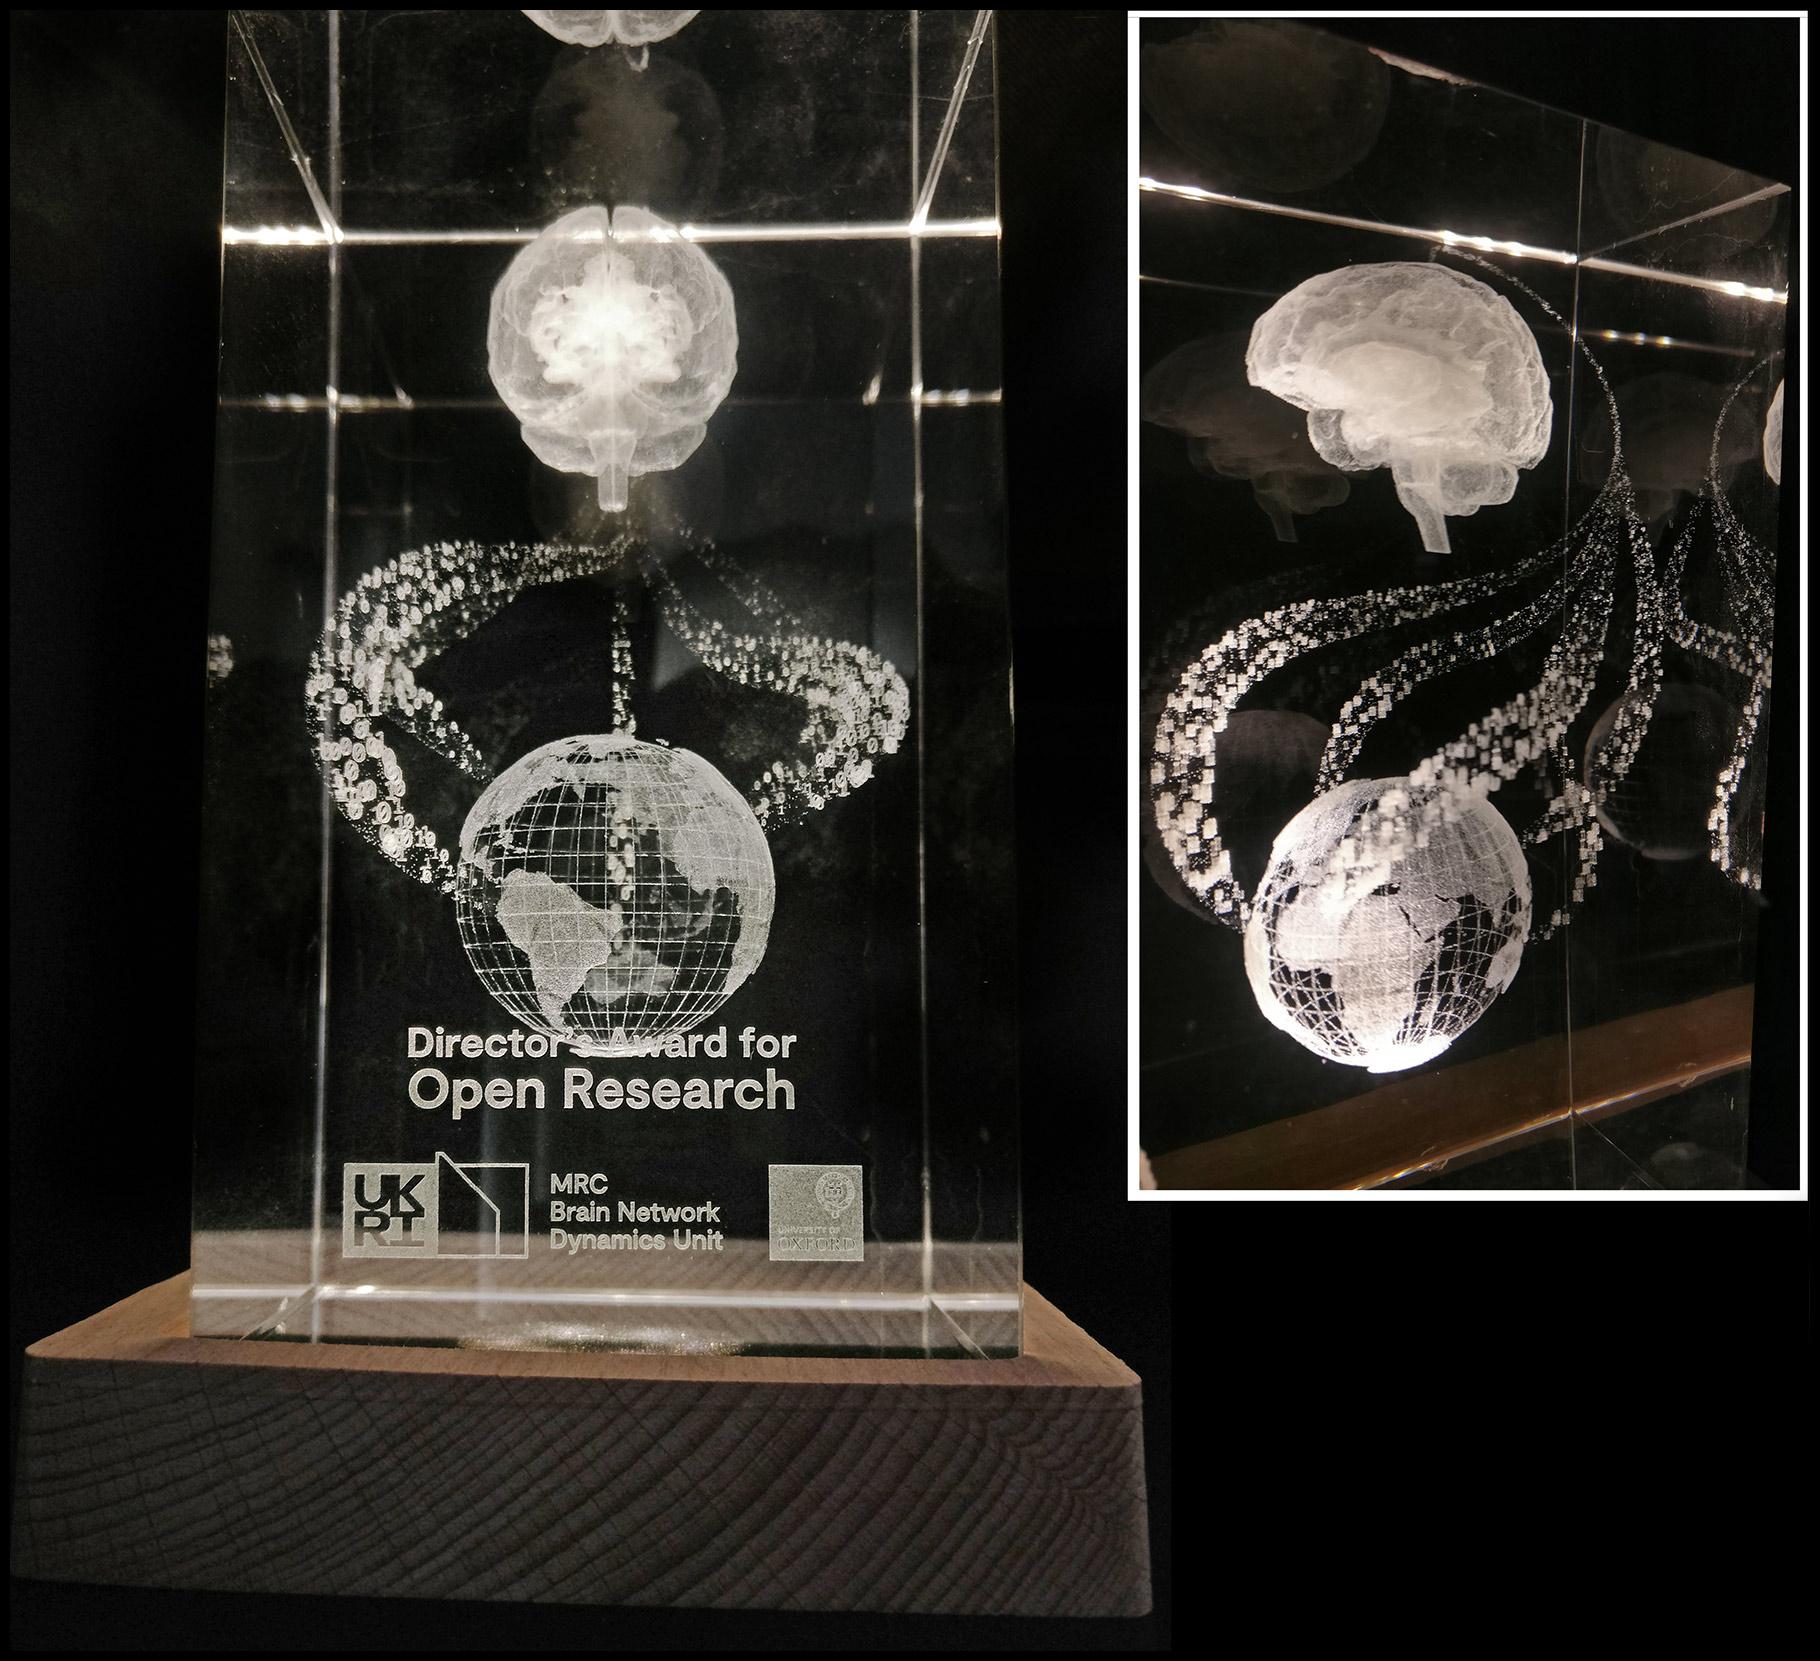 Photograph of the Director's Award for OpenResearch